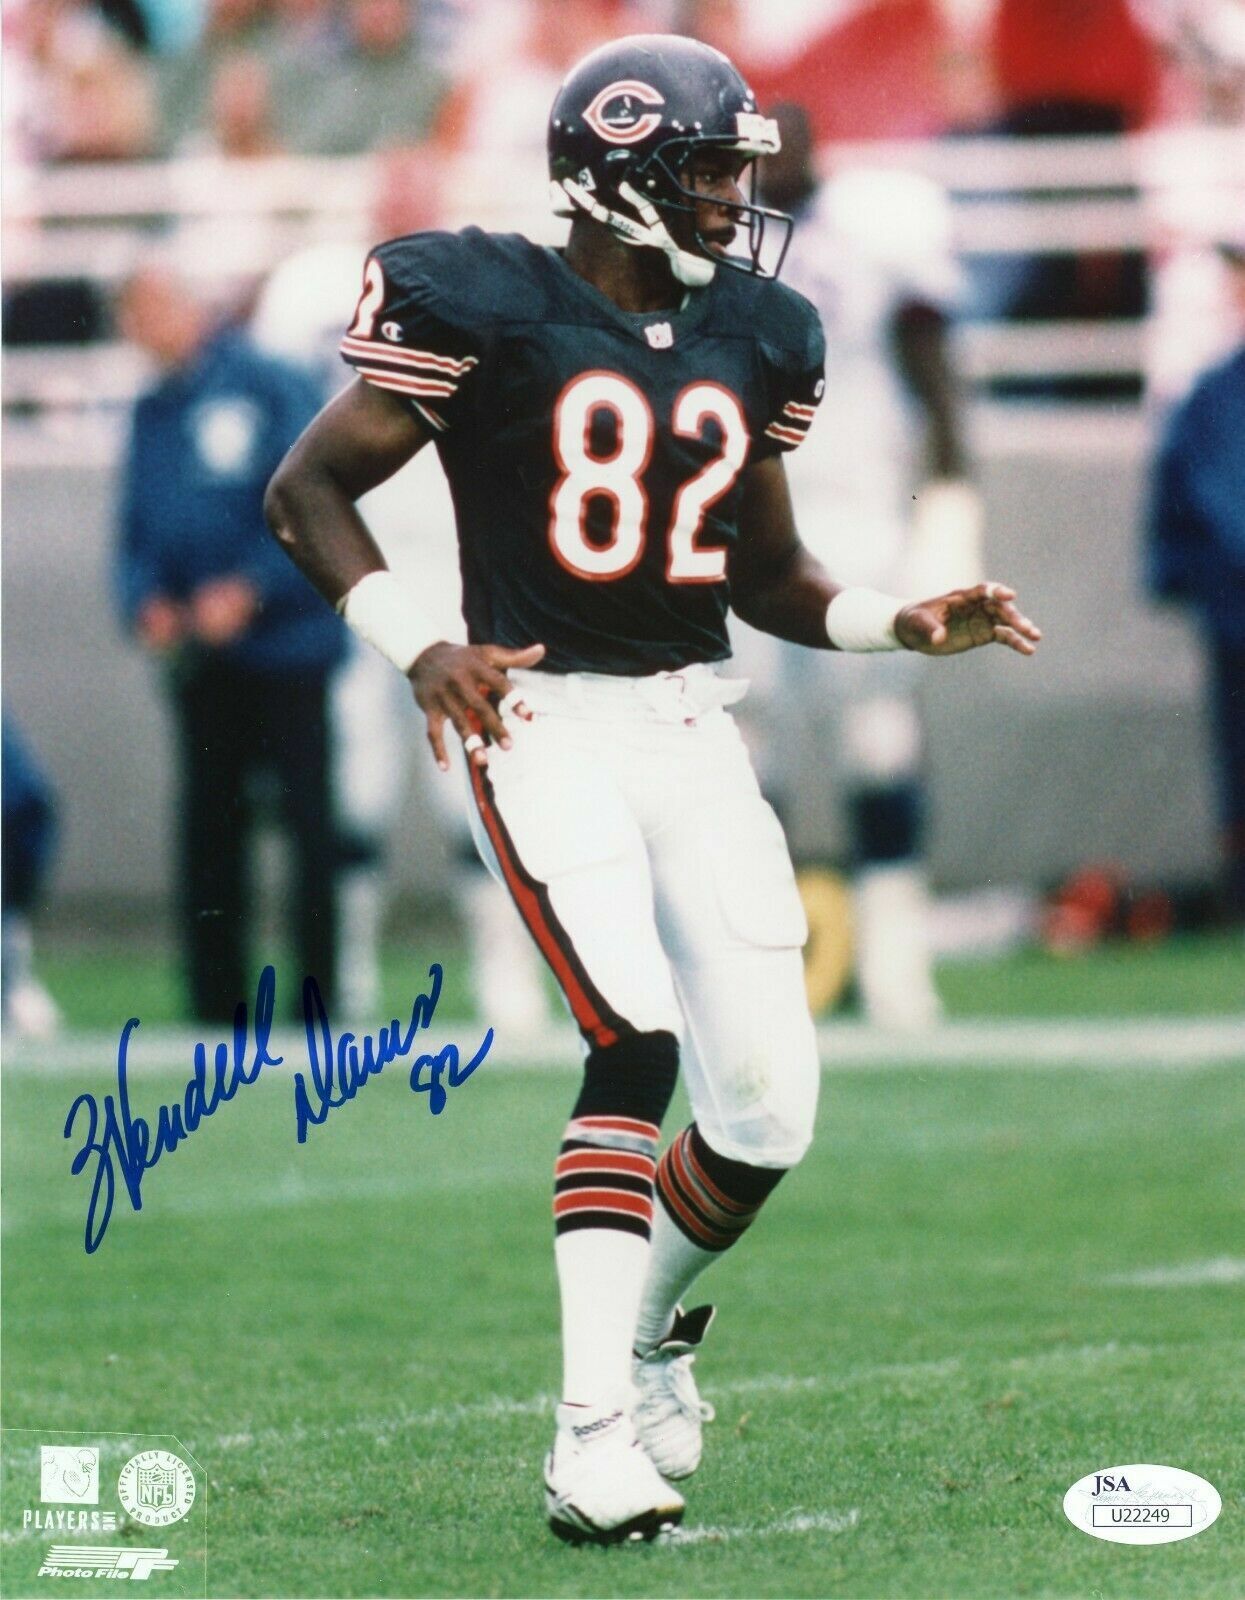 Wendell Davis Signed 8x10 JSA COA Photo Poster painting Autograph 8x Chicago Bears